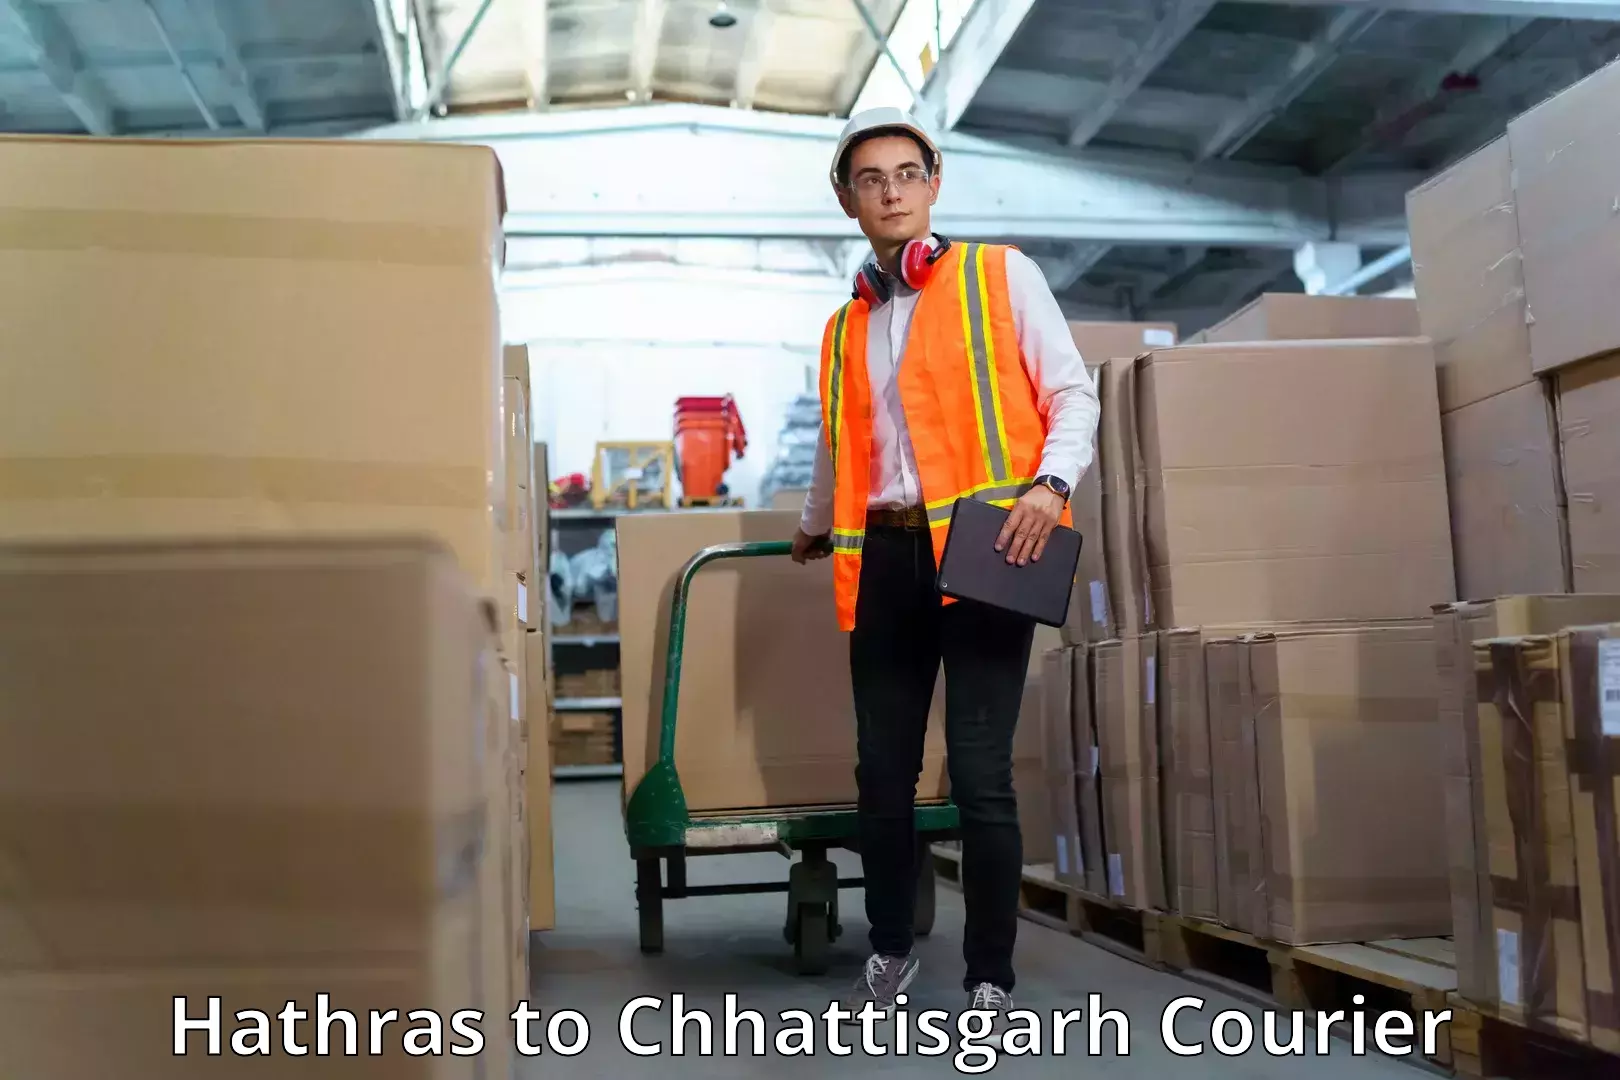 State-of-the-art courier technology Hathras to Premnagar